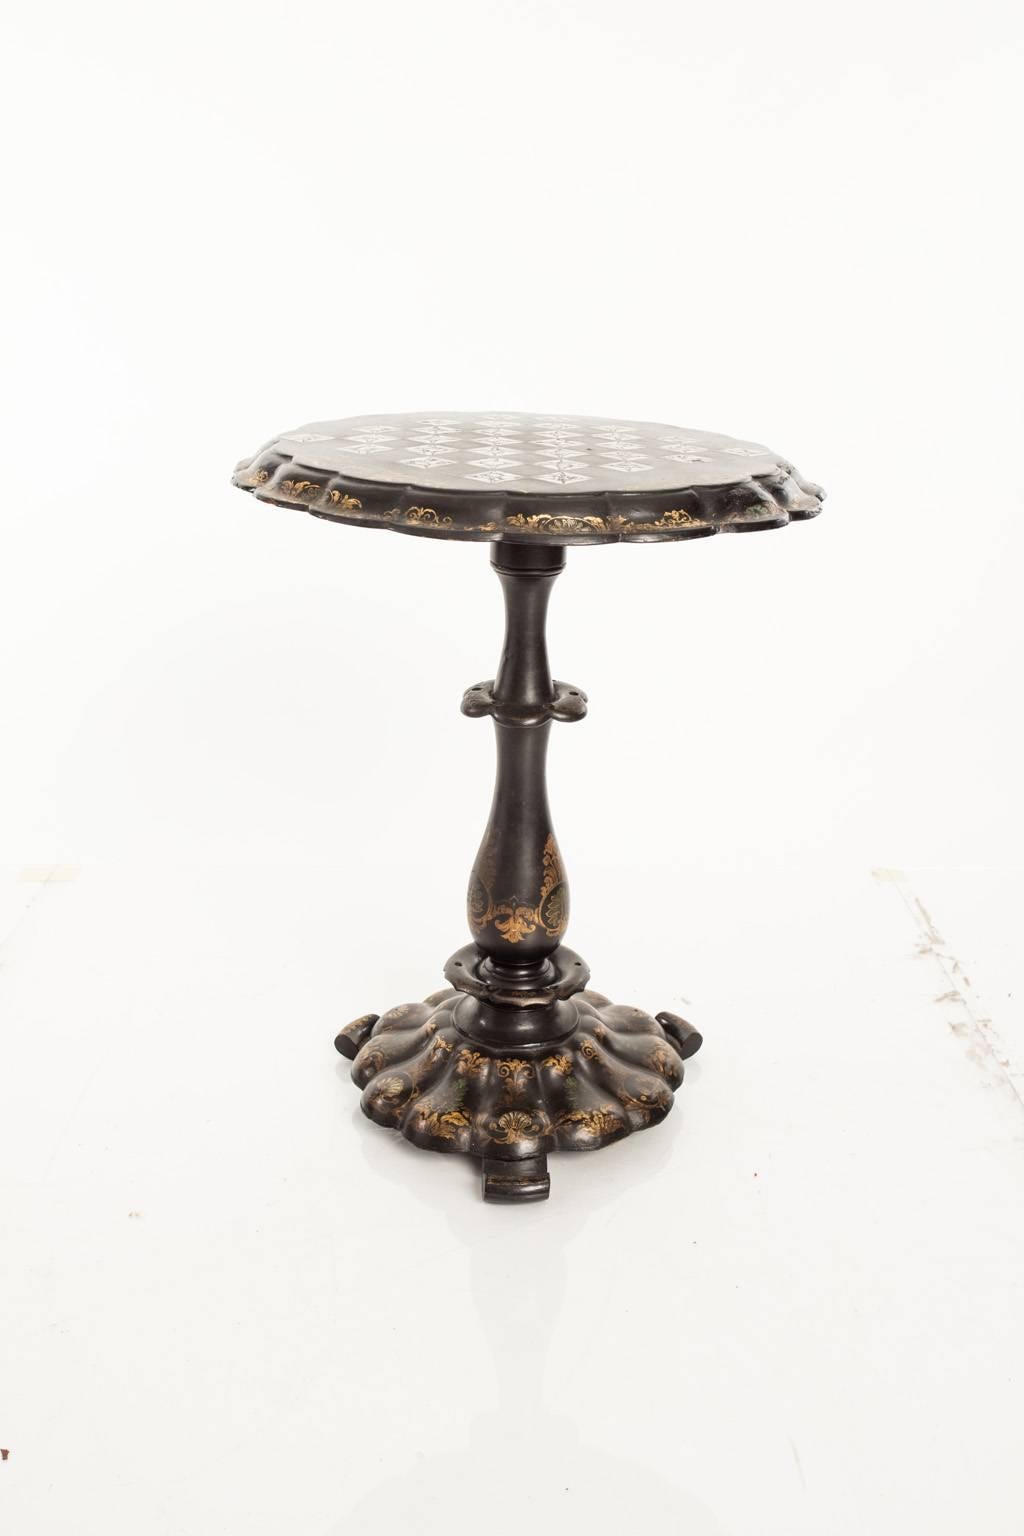 Victorian papier mâché side table in ebonized finish with scalloped apron. Decorated with gold appliqués and mother-of-pearl.